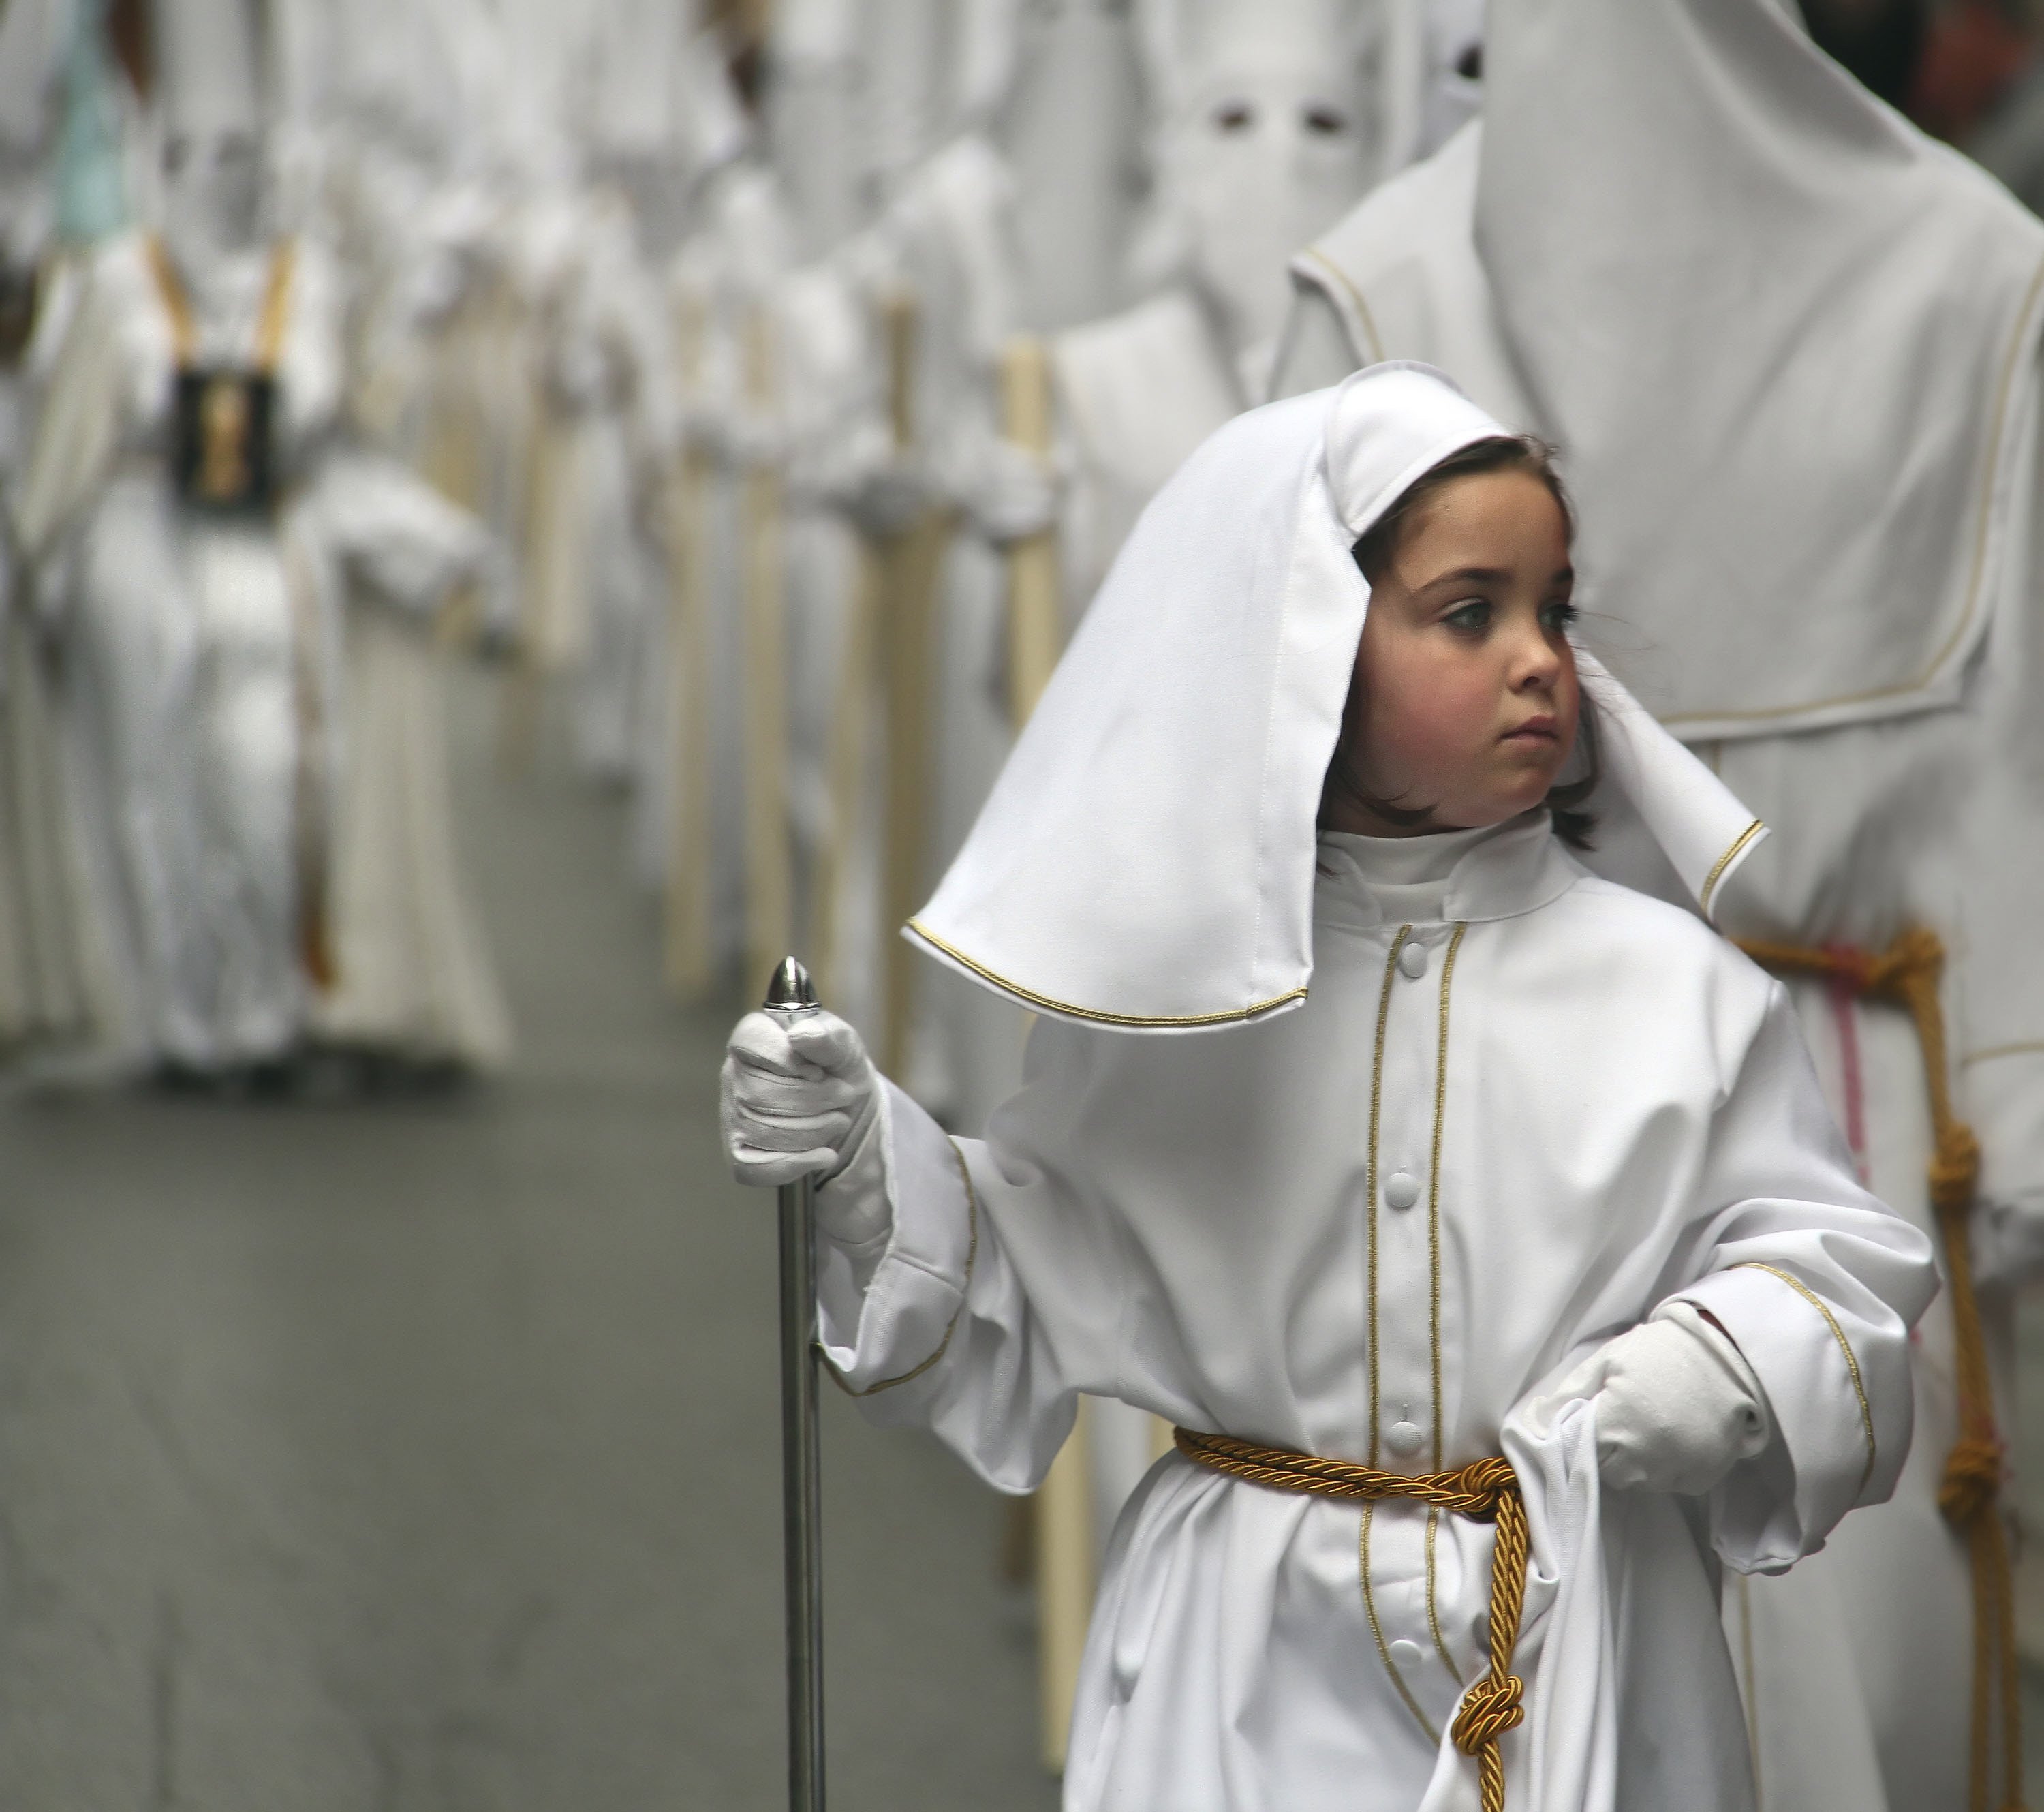 Malaga, Spain. 3rd April 2012 -- Child takes part in the ceremonial Holy Week procession. -- Every year in Malaga, southern Spain, different brotherhood groups or 'agrupaciones' lead a procession to celebrate Easter or Holy Week while wearing their distinctive outfits or 'capirotes'. [24NOVEMBER2015 FEATURE]